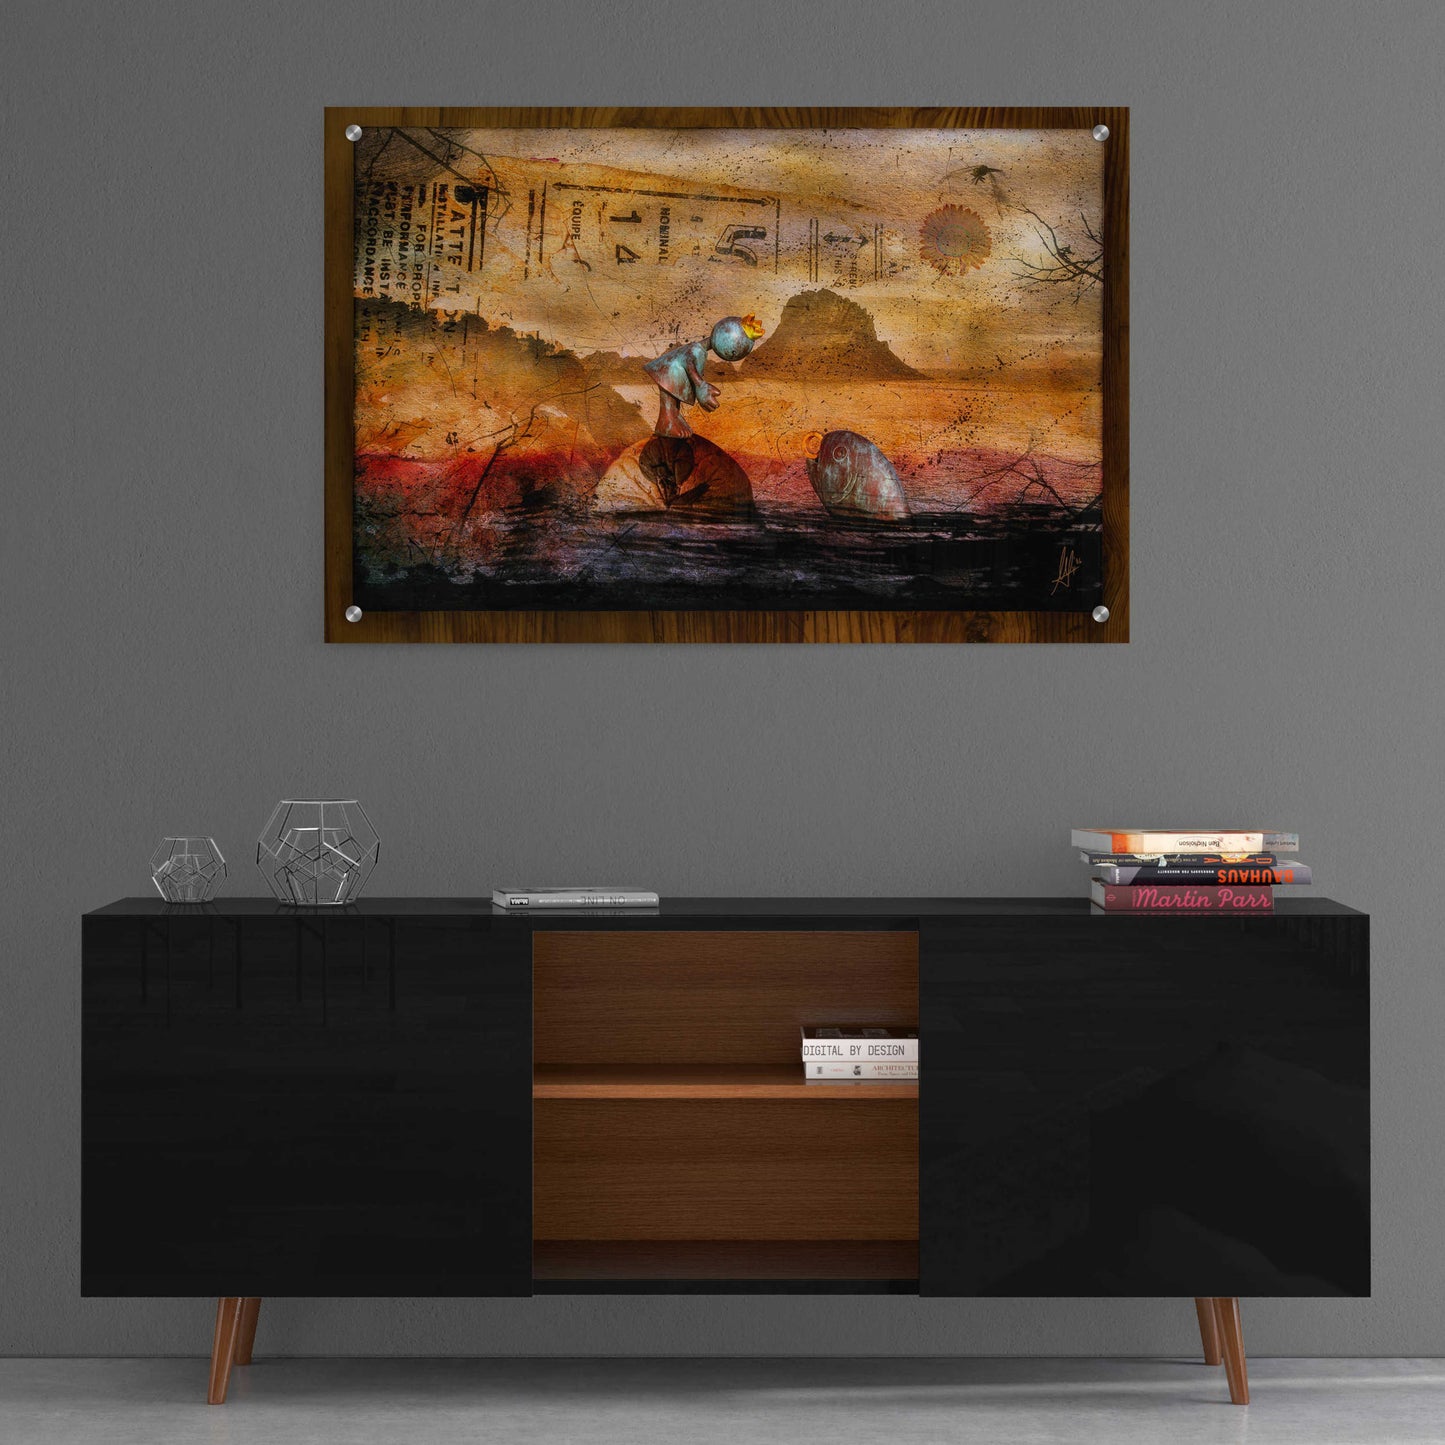 Epic Art 'Once Upon A Time' by Mario Sanchez Nevado, Acrylic Glass Wall Art,24x36